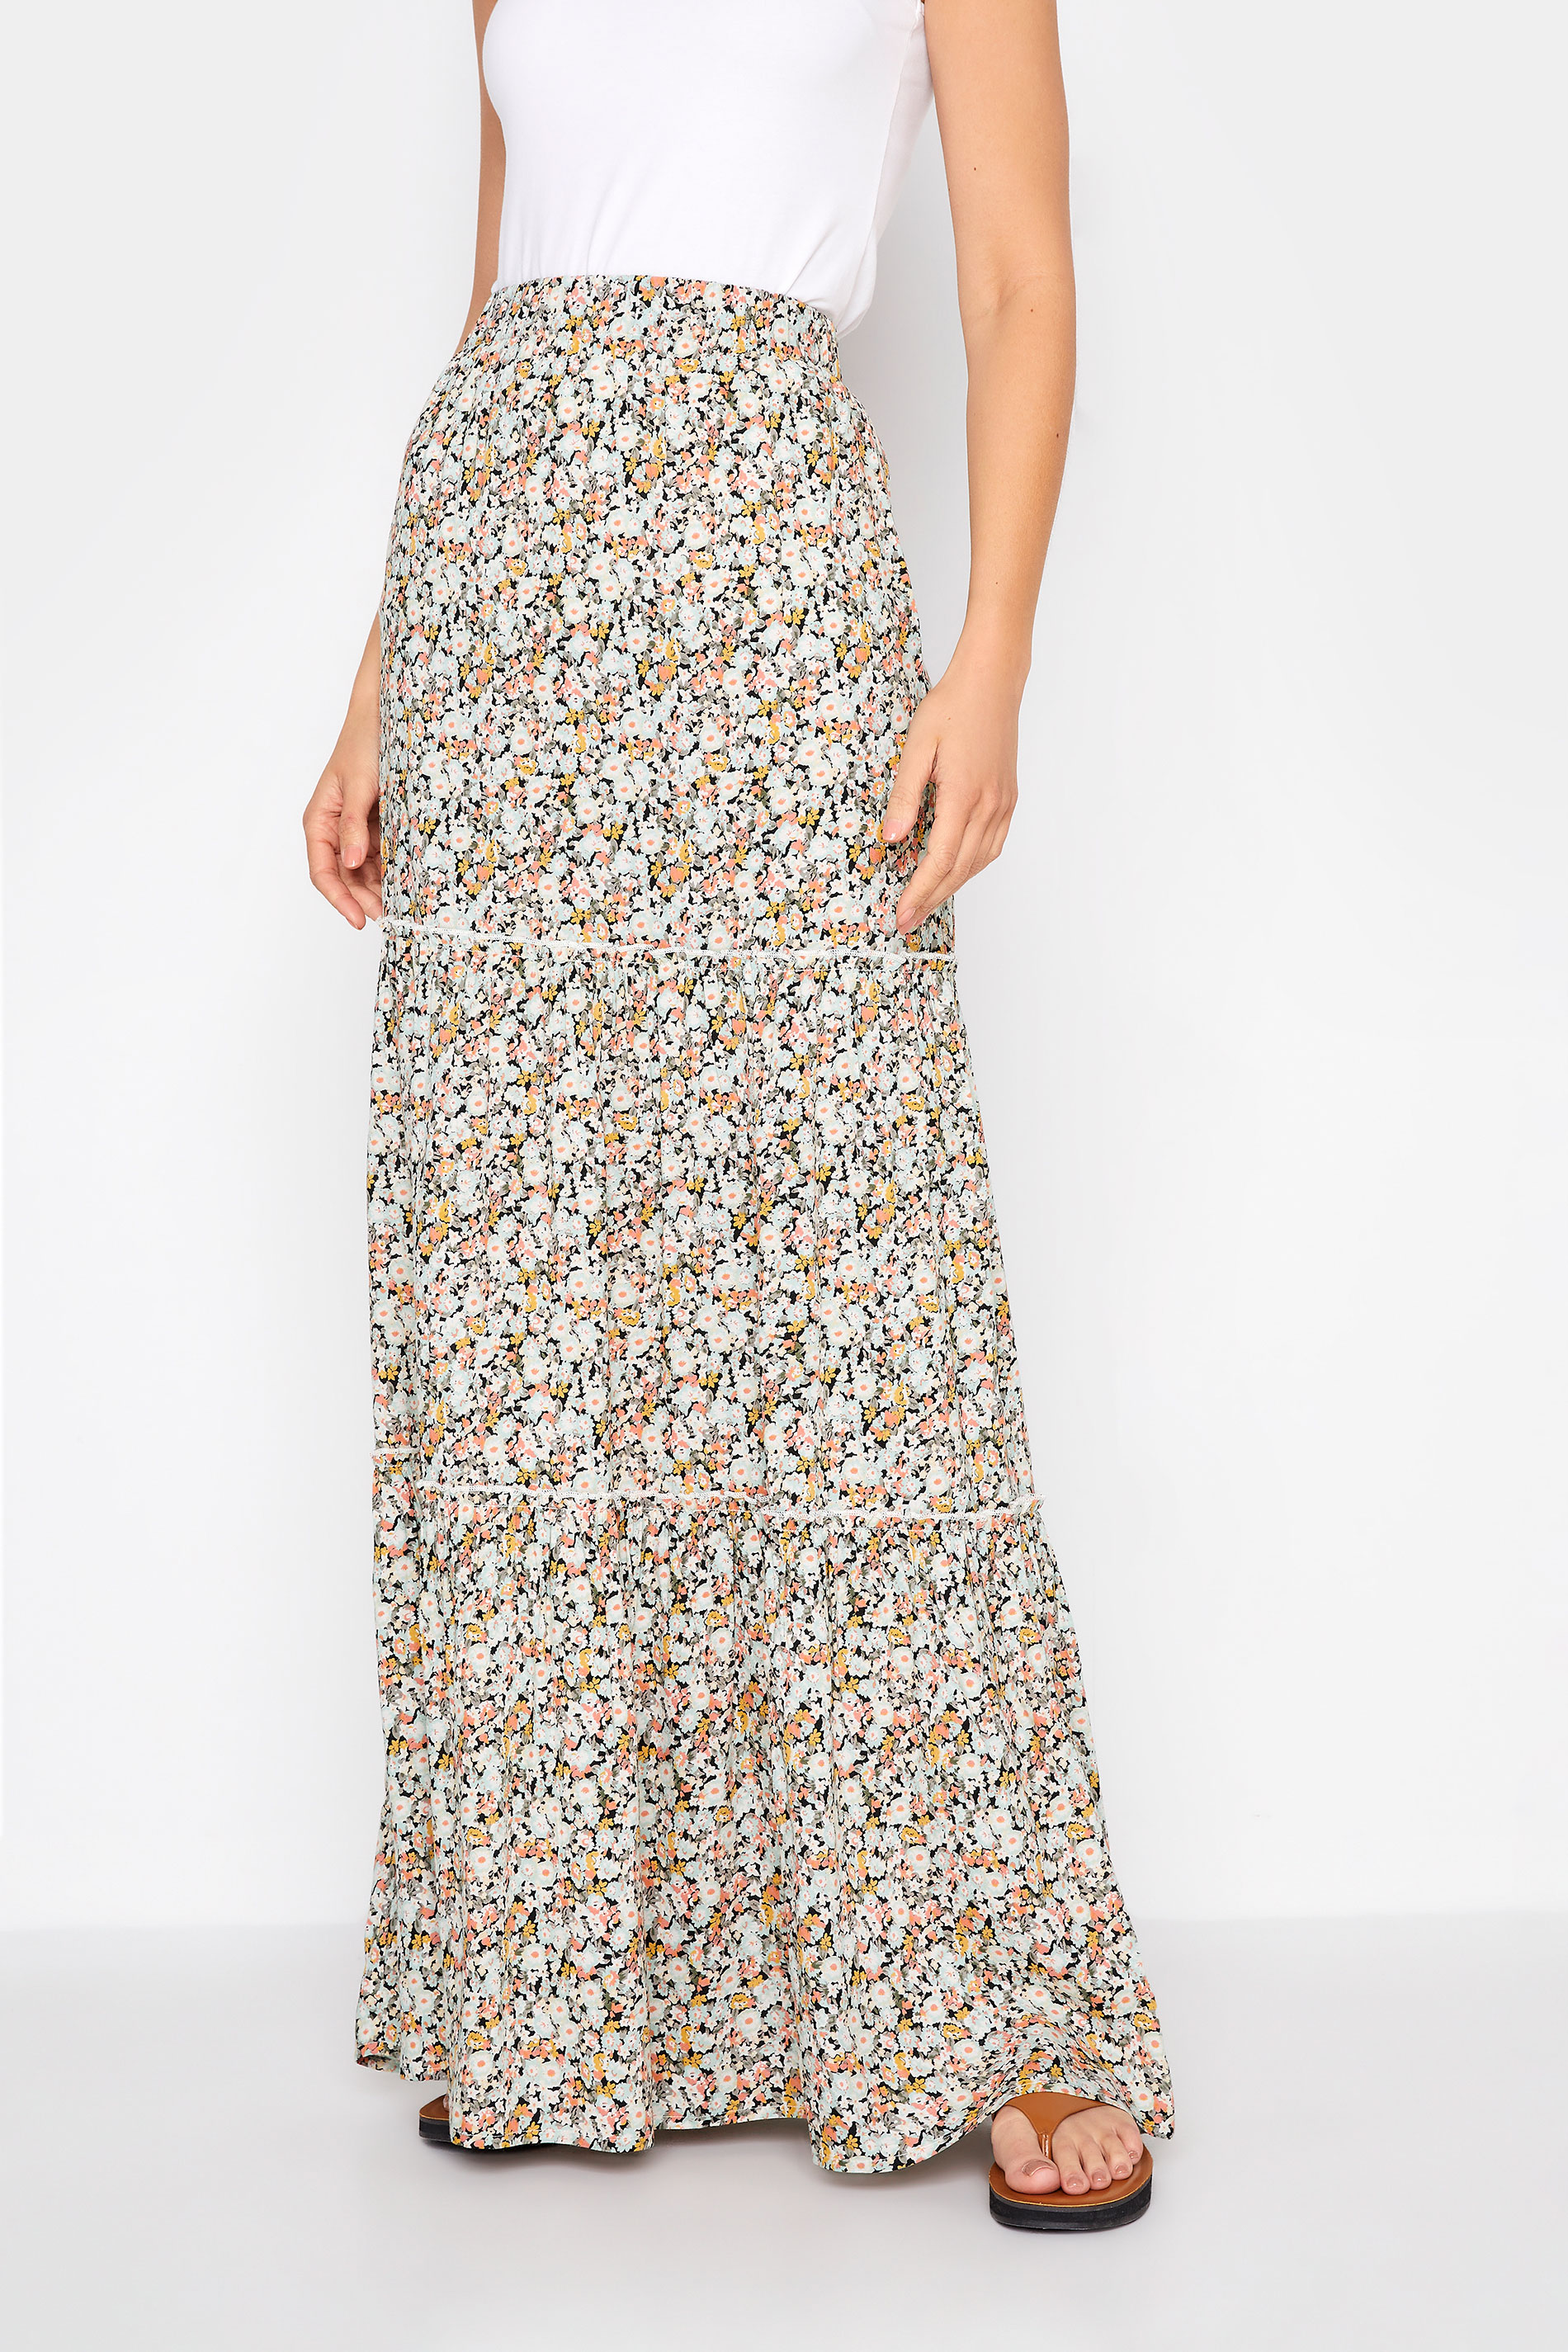 LTS Tall Beige Brown Floral Tiered Maxi Skirt 1